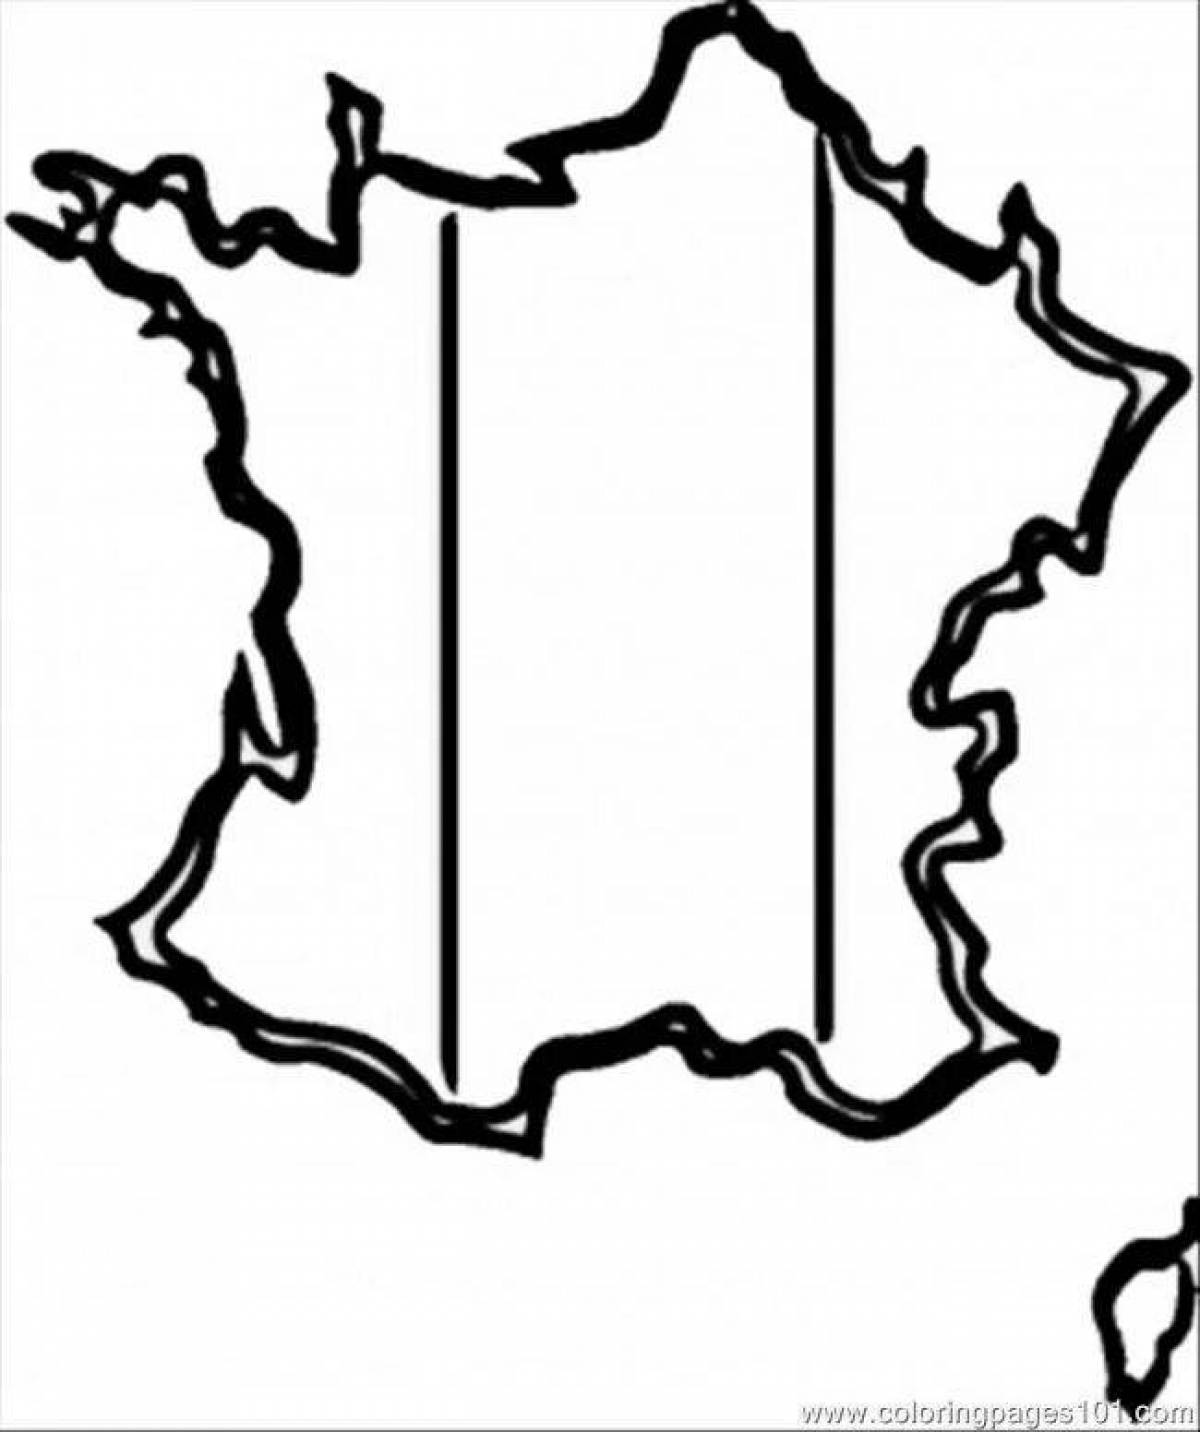 Colorfully detailed france flag coloring page